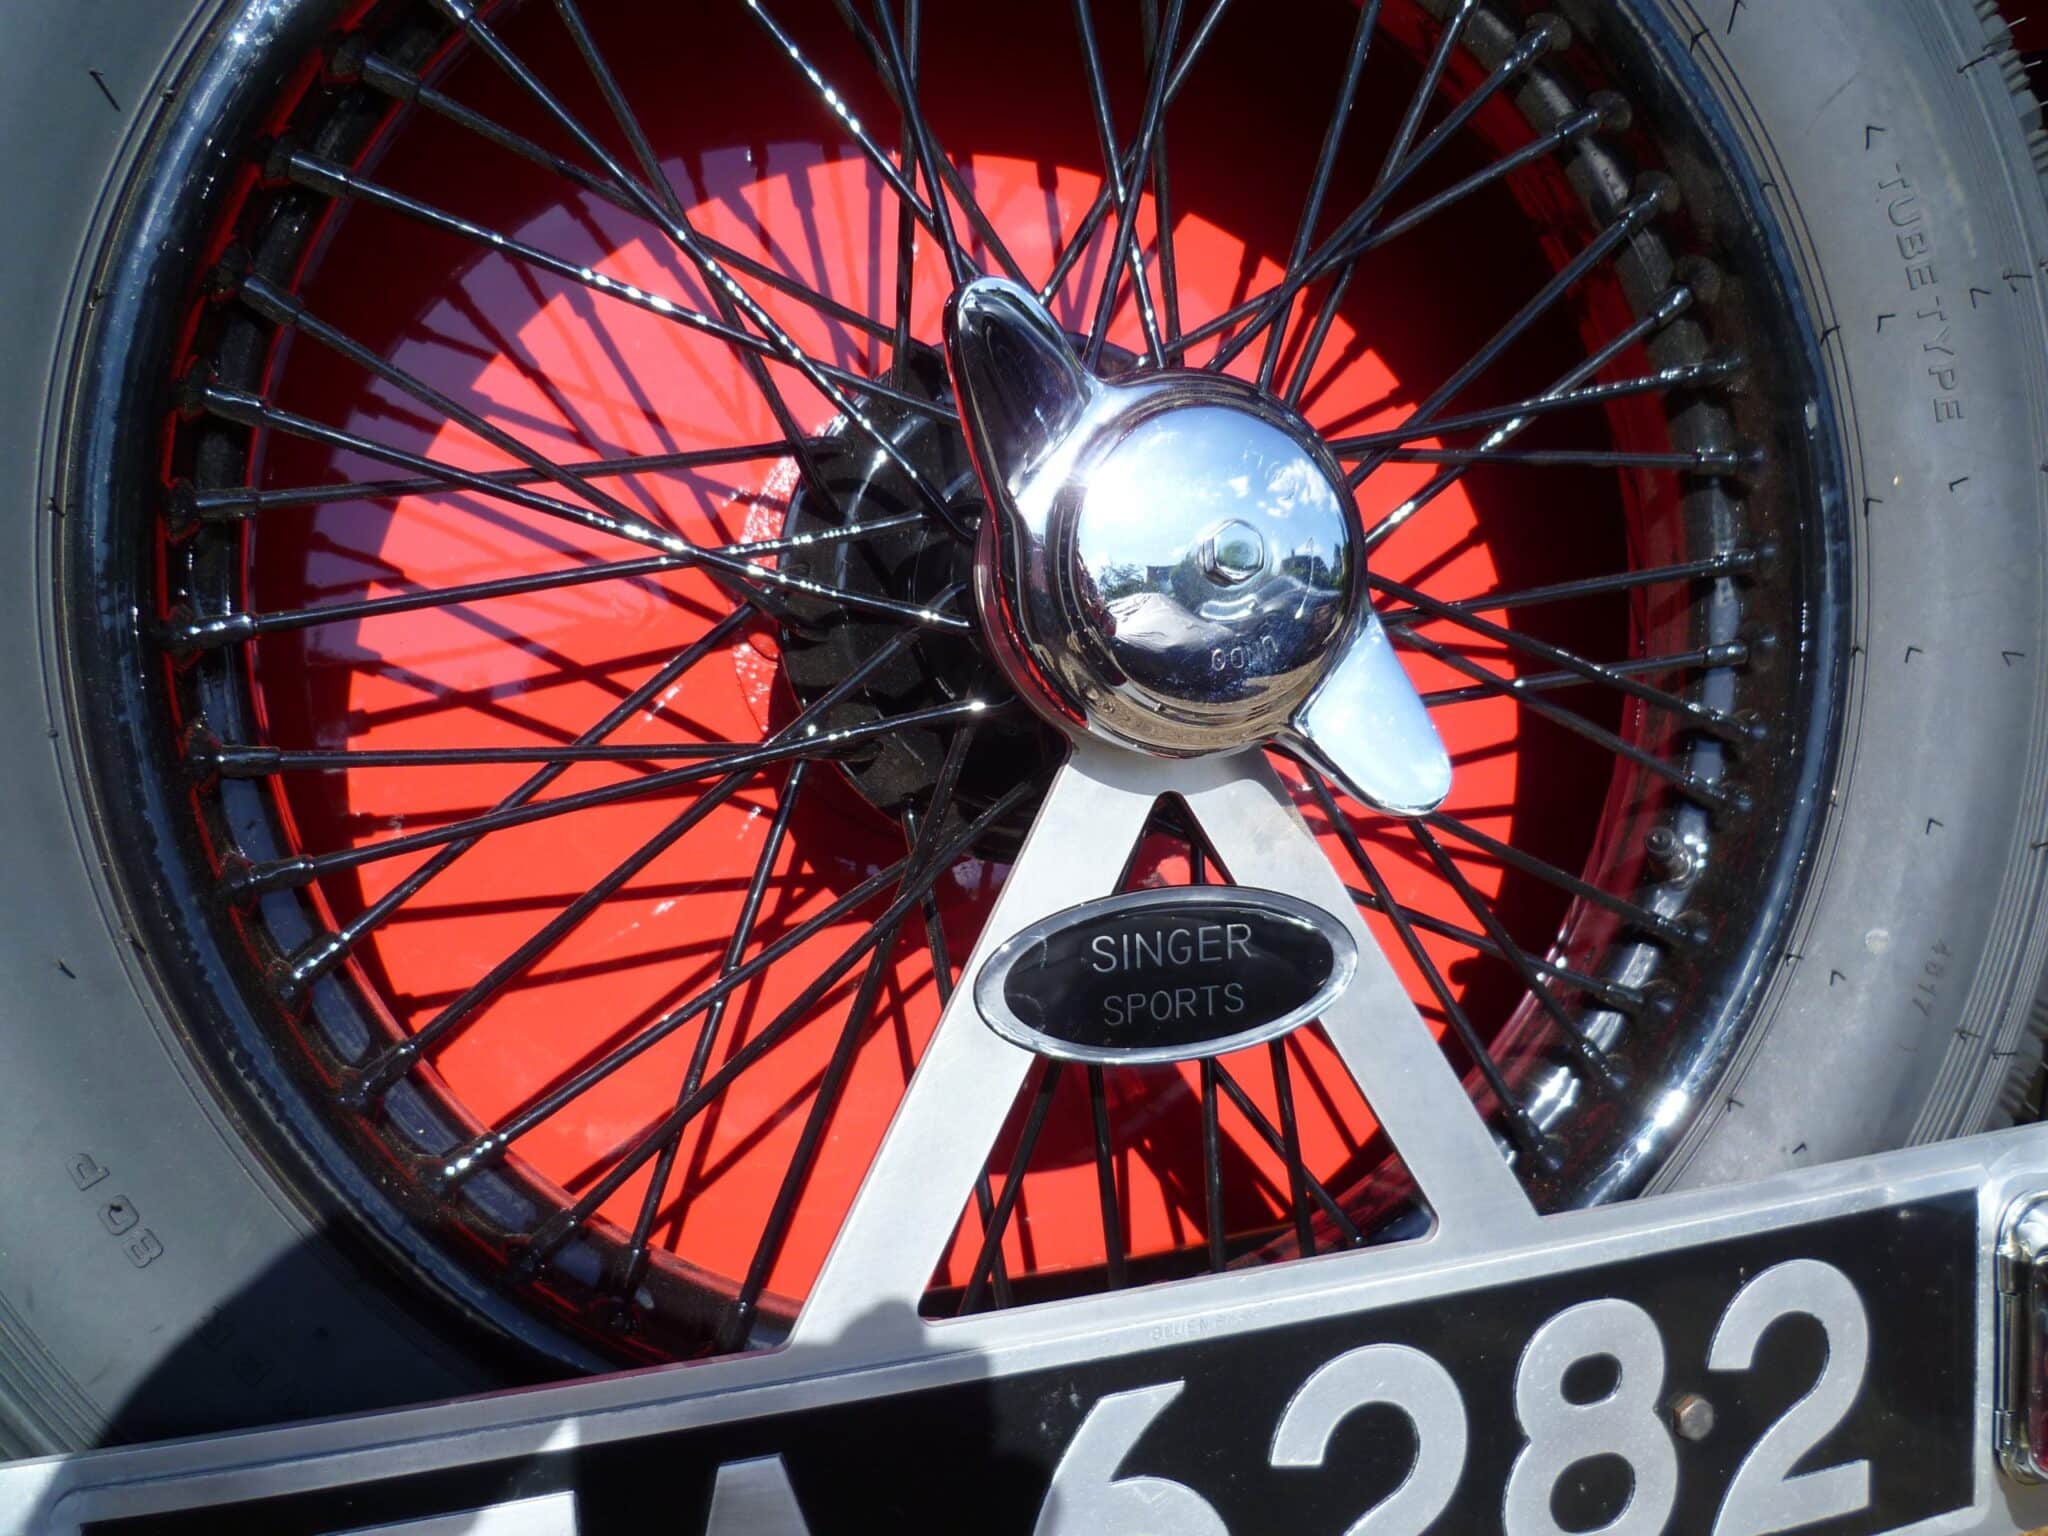 Weather-Resistant Alloy Wheel Emblems for Caravan and Trailer Manufacturers